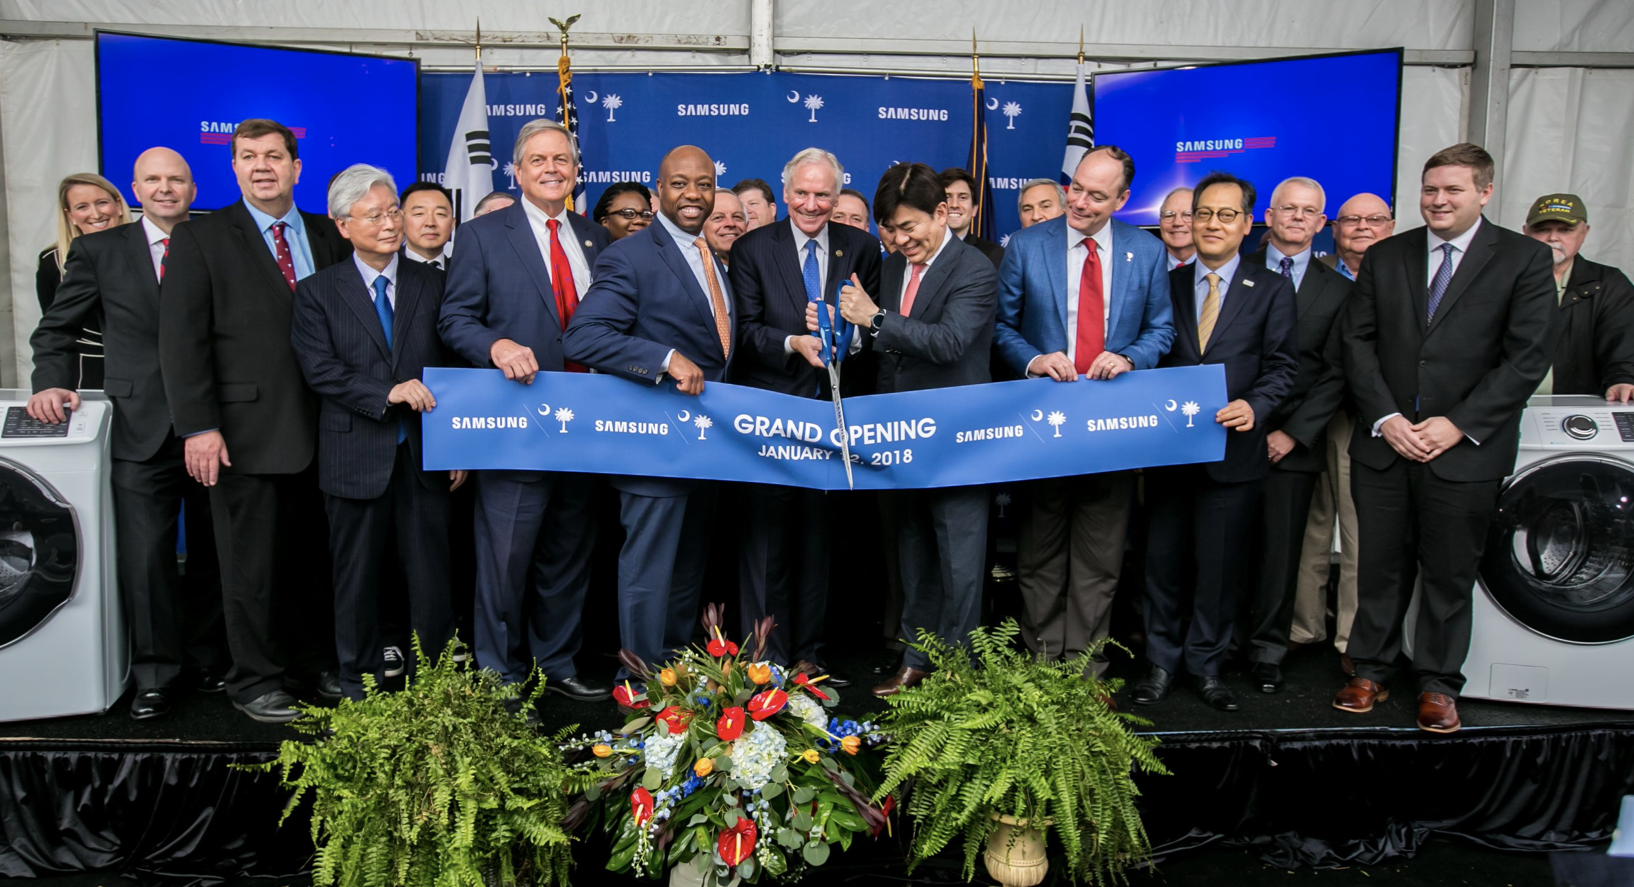 Governor Henry McMaster, Rep. Ralph Norman, and Sen. Tim Scott join Samsung, state, and county officials at the 2018 ribbon cutting for the Samsung Electronics Home Appliances facility in Newberry.  R